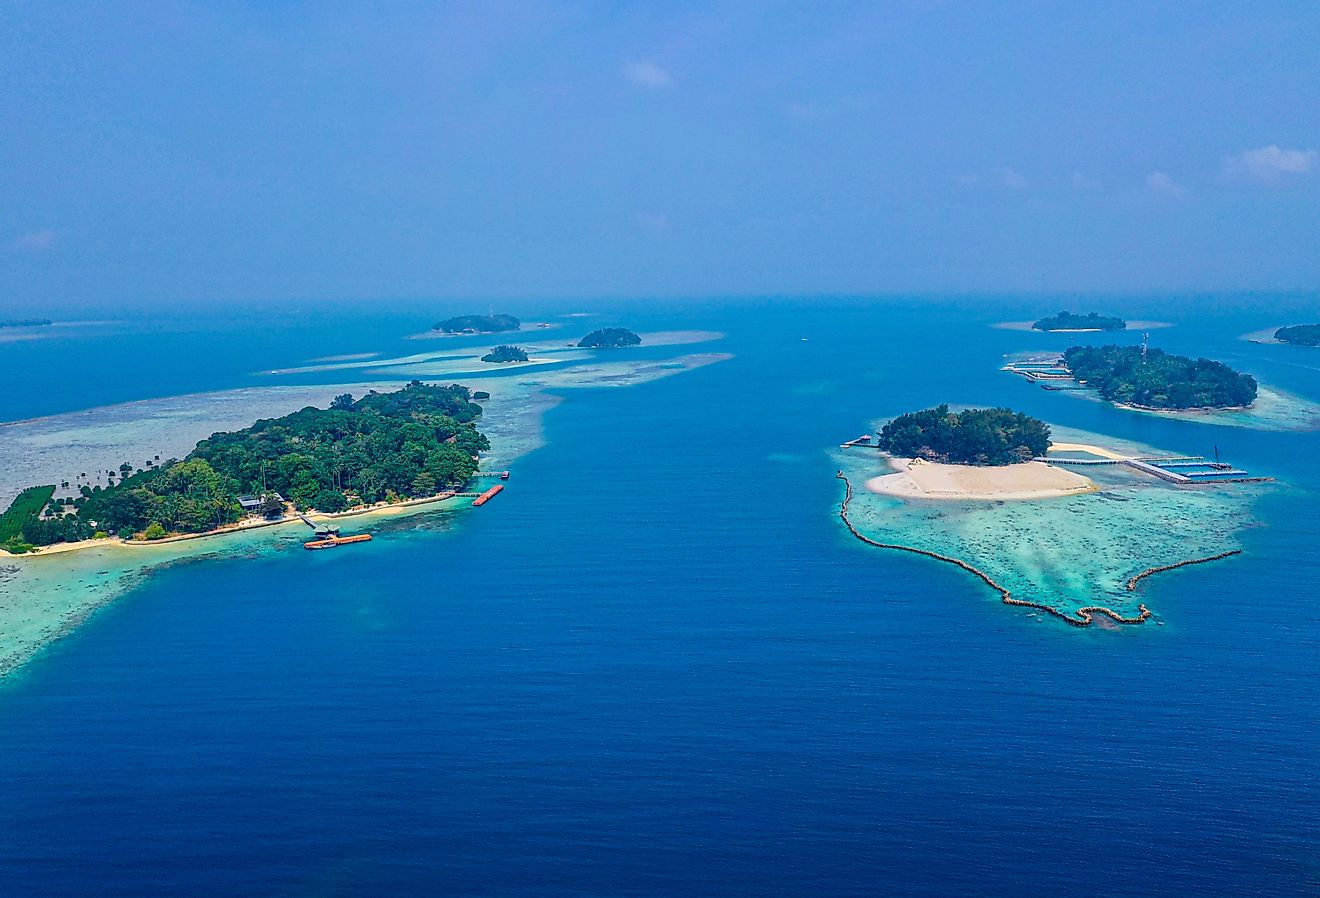 Aerial view of Thousand Islands in Java, Indonesia. Image credit Bryce P via Shutterstock.